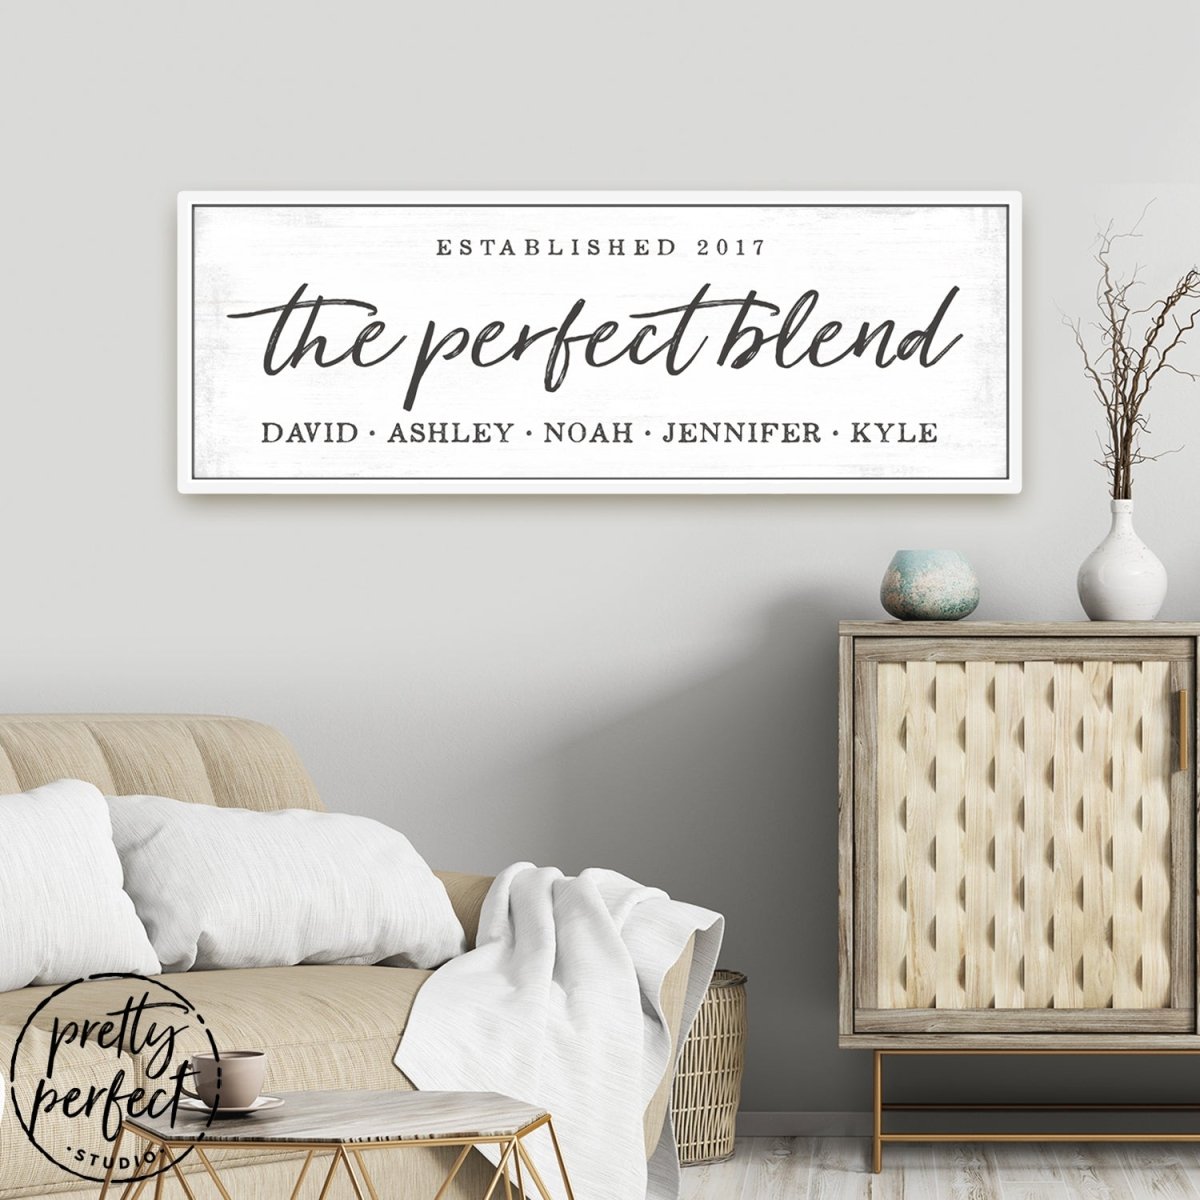 The Perfect Blend Personalized Name Sign With Established Date in Family Room - Pretty Perfect Studio